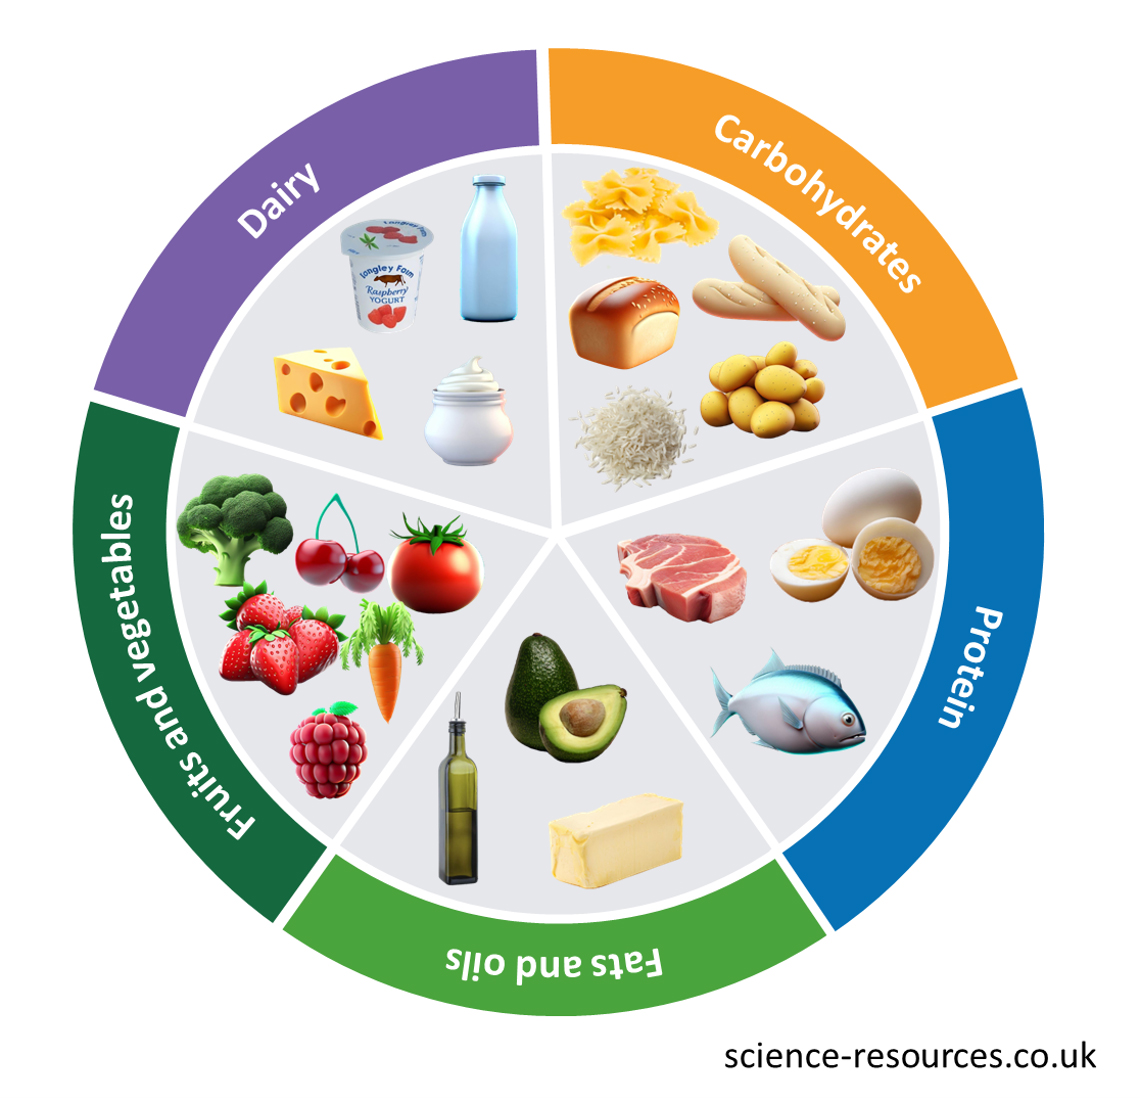 Image showing the 5 different food groups. The image is divided into different sections, each labeled with a type of food category such as “Dairy,” “Carbohydrates,” “Protein,” and “Fruits and Vegetables, fats and oils.” 